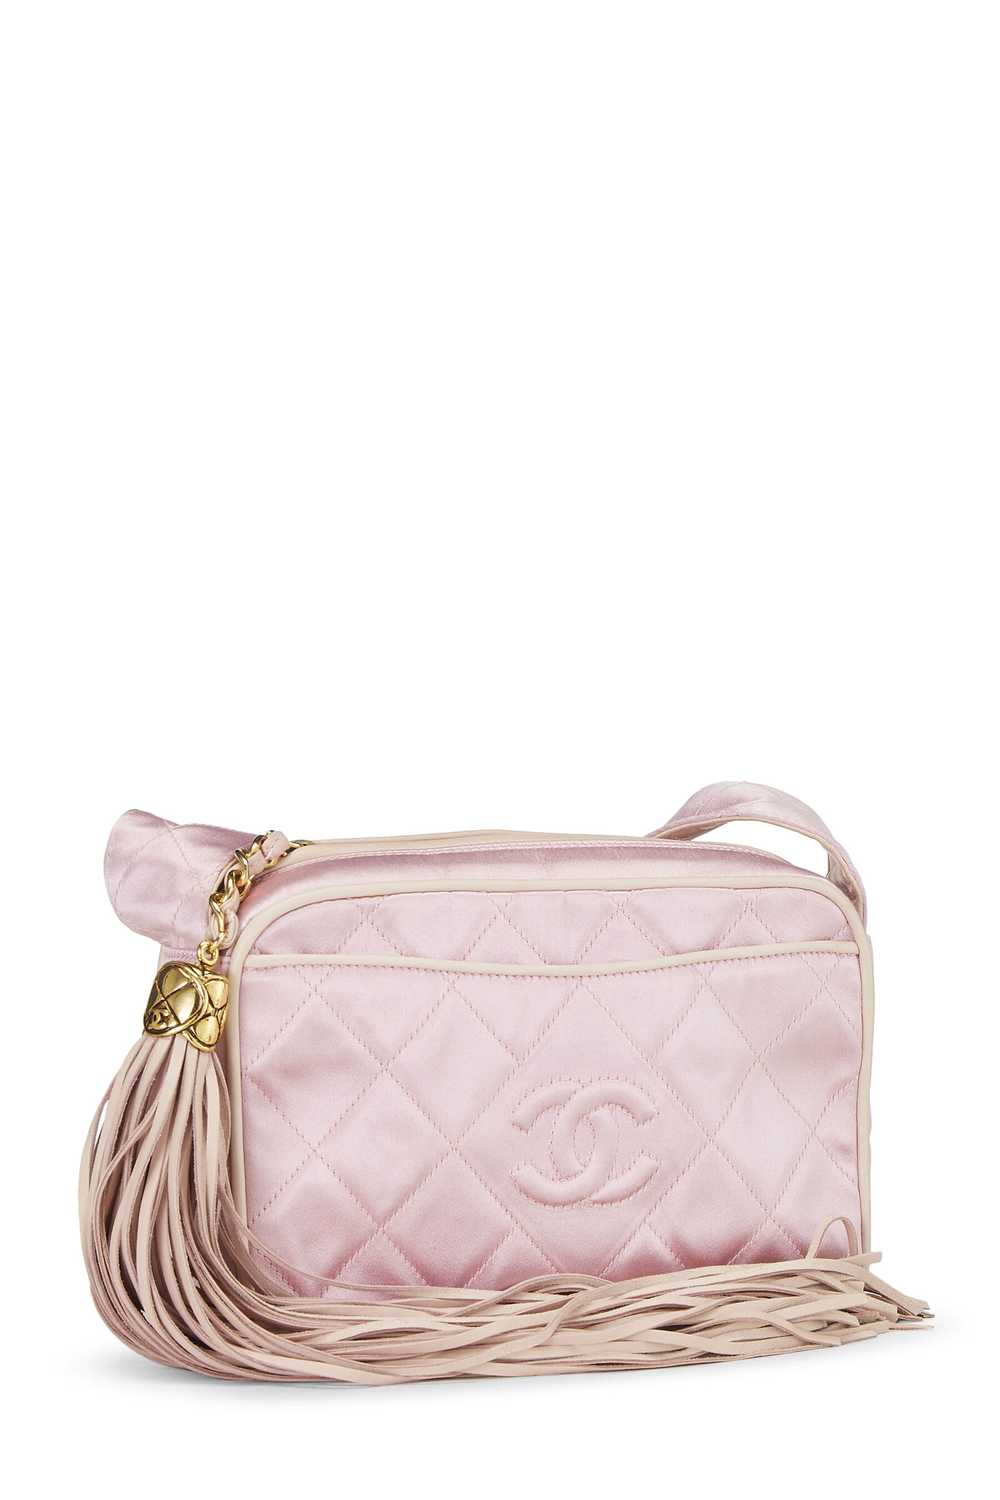 Pink Quilted Satin 'CC' Shoulder Bag Small - image 4